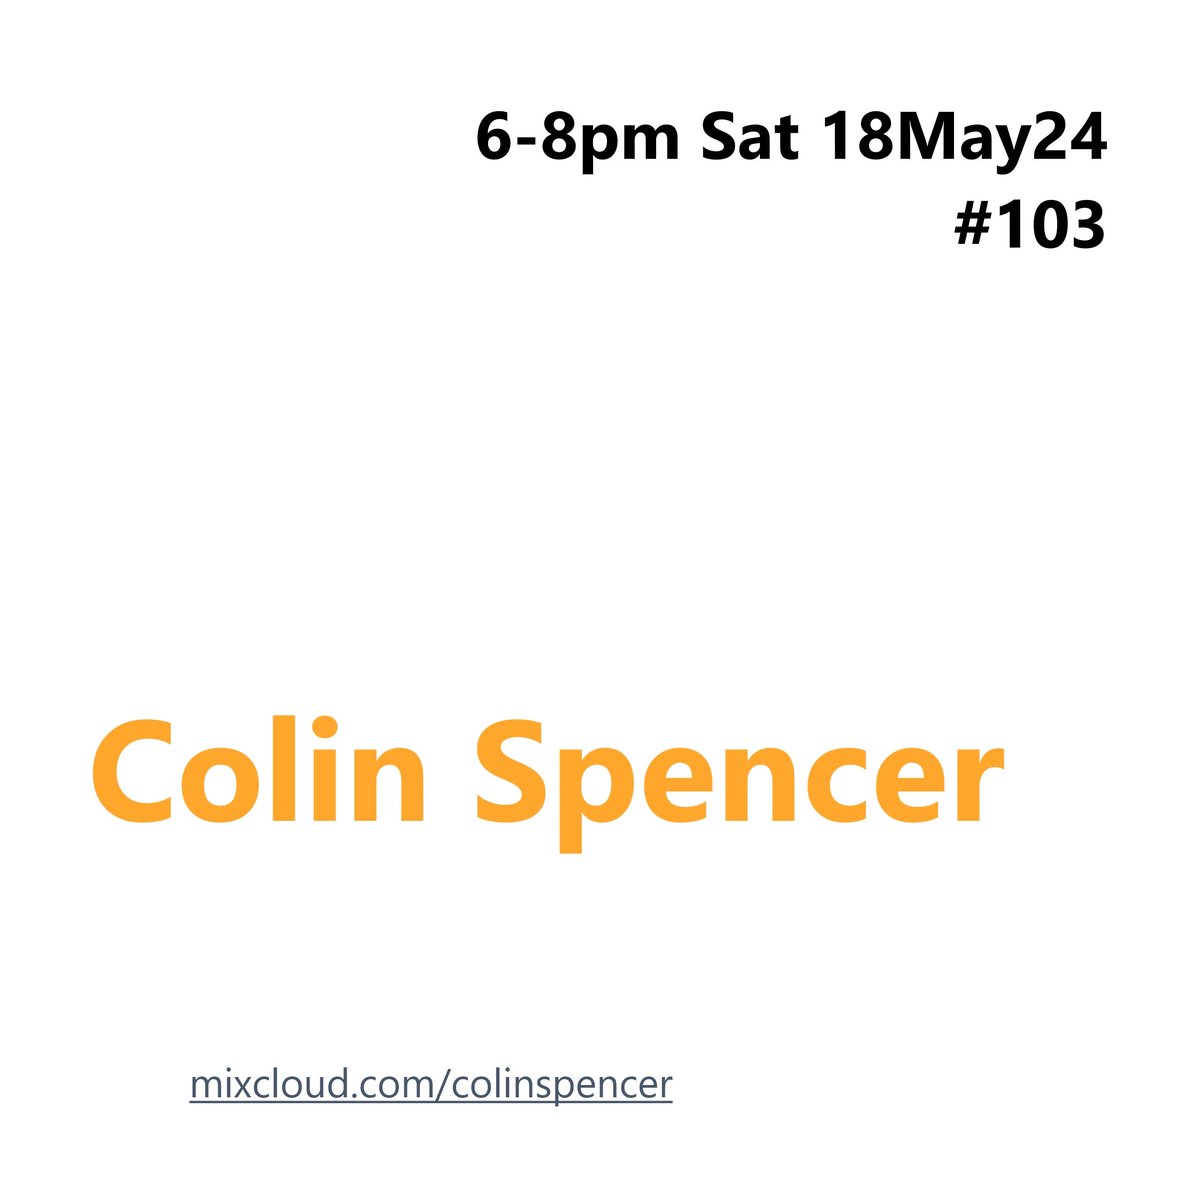 #EXCLUSIVE #Jalkanen 'Ravenstock Club' from The Entrophony Experiments EP gets its #worldwide première firstplay during #ColinSpencer Programme #103 🔊mixcloud.com/colinspencer/🎧 Saturday 18 May 2024 6-8pm (#UK times) #DiscoverAndRemember Catch-up #102 ▶️mixcloud.com/ColinSpencer/c…